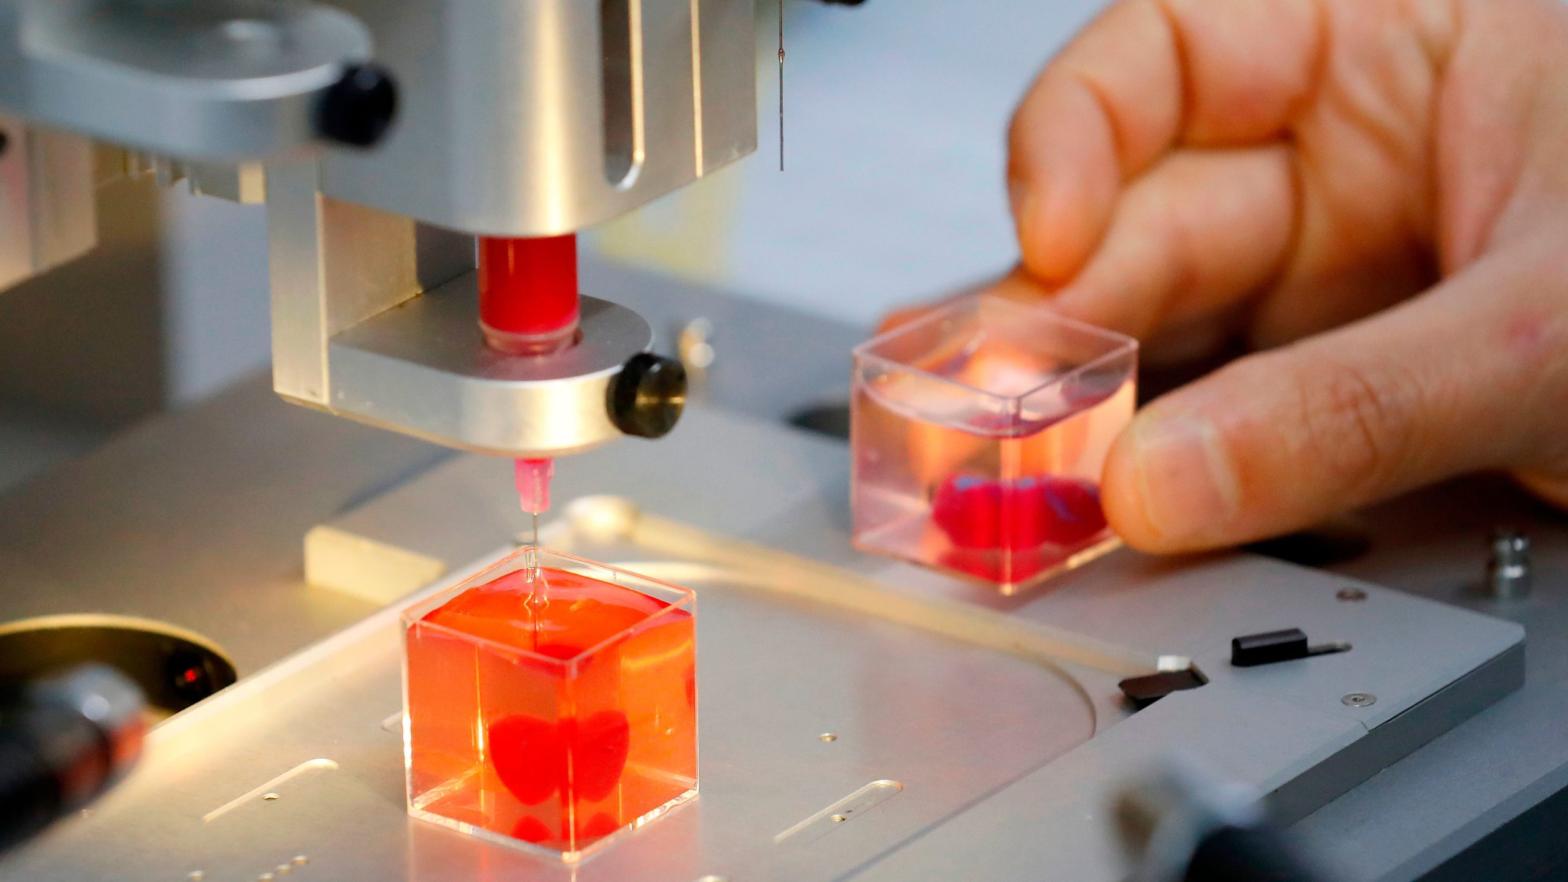 A 3D printed heart made with human tissue at the University of Tel Aviv, April 15, 2019. (Photo: Jack Guez/AFP, Getty Images)